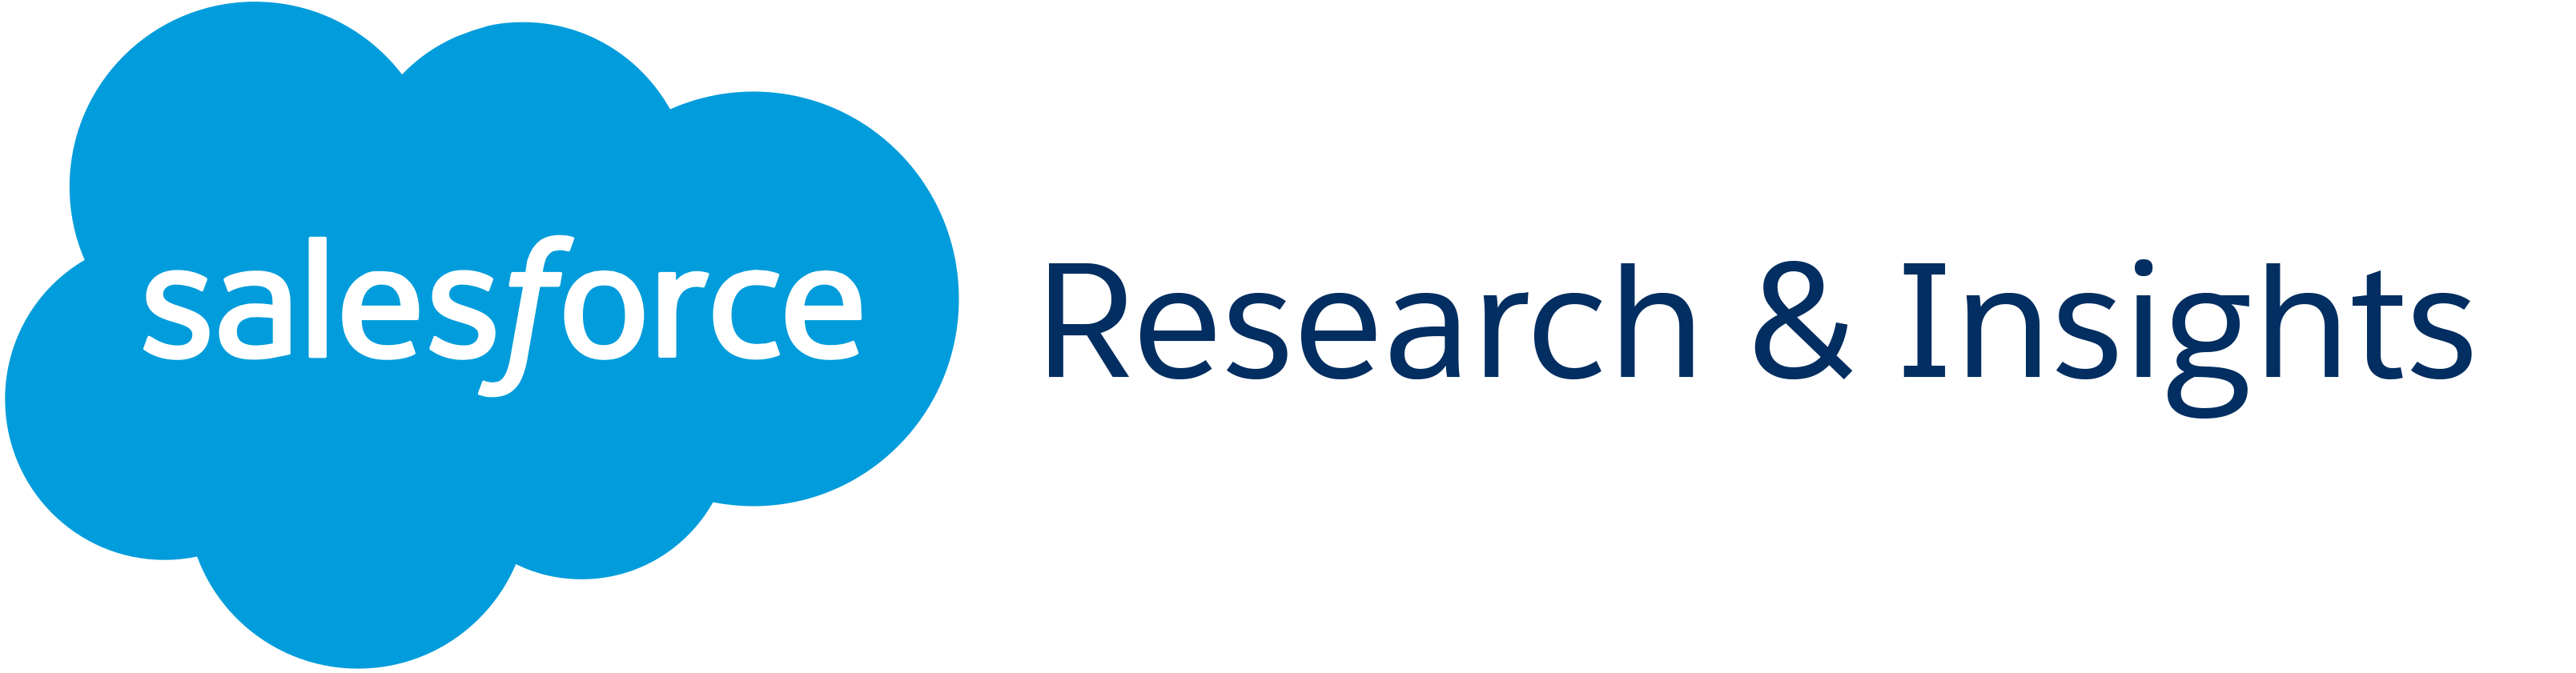 Salesforce Research & Insights